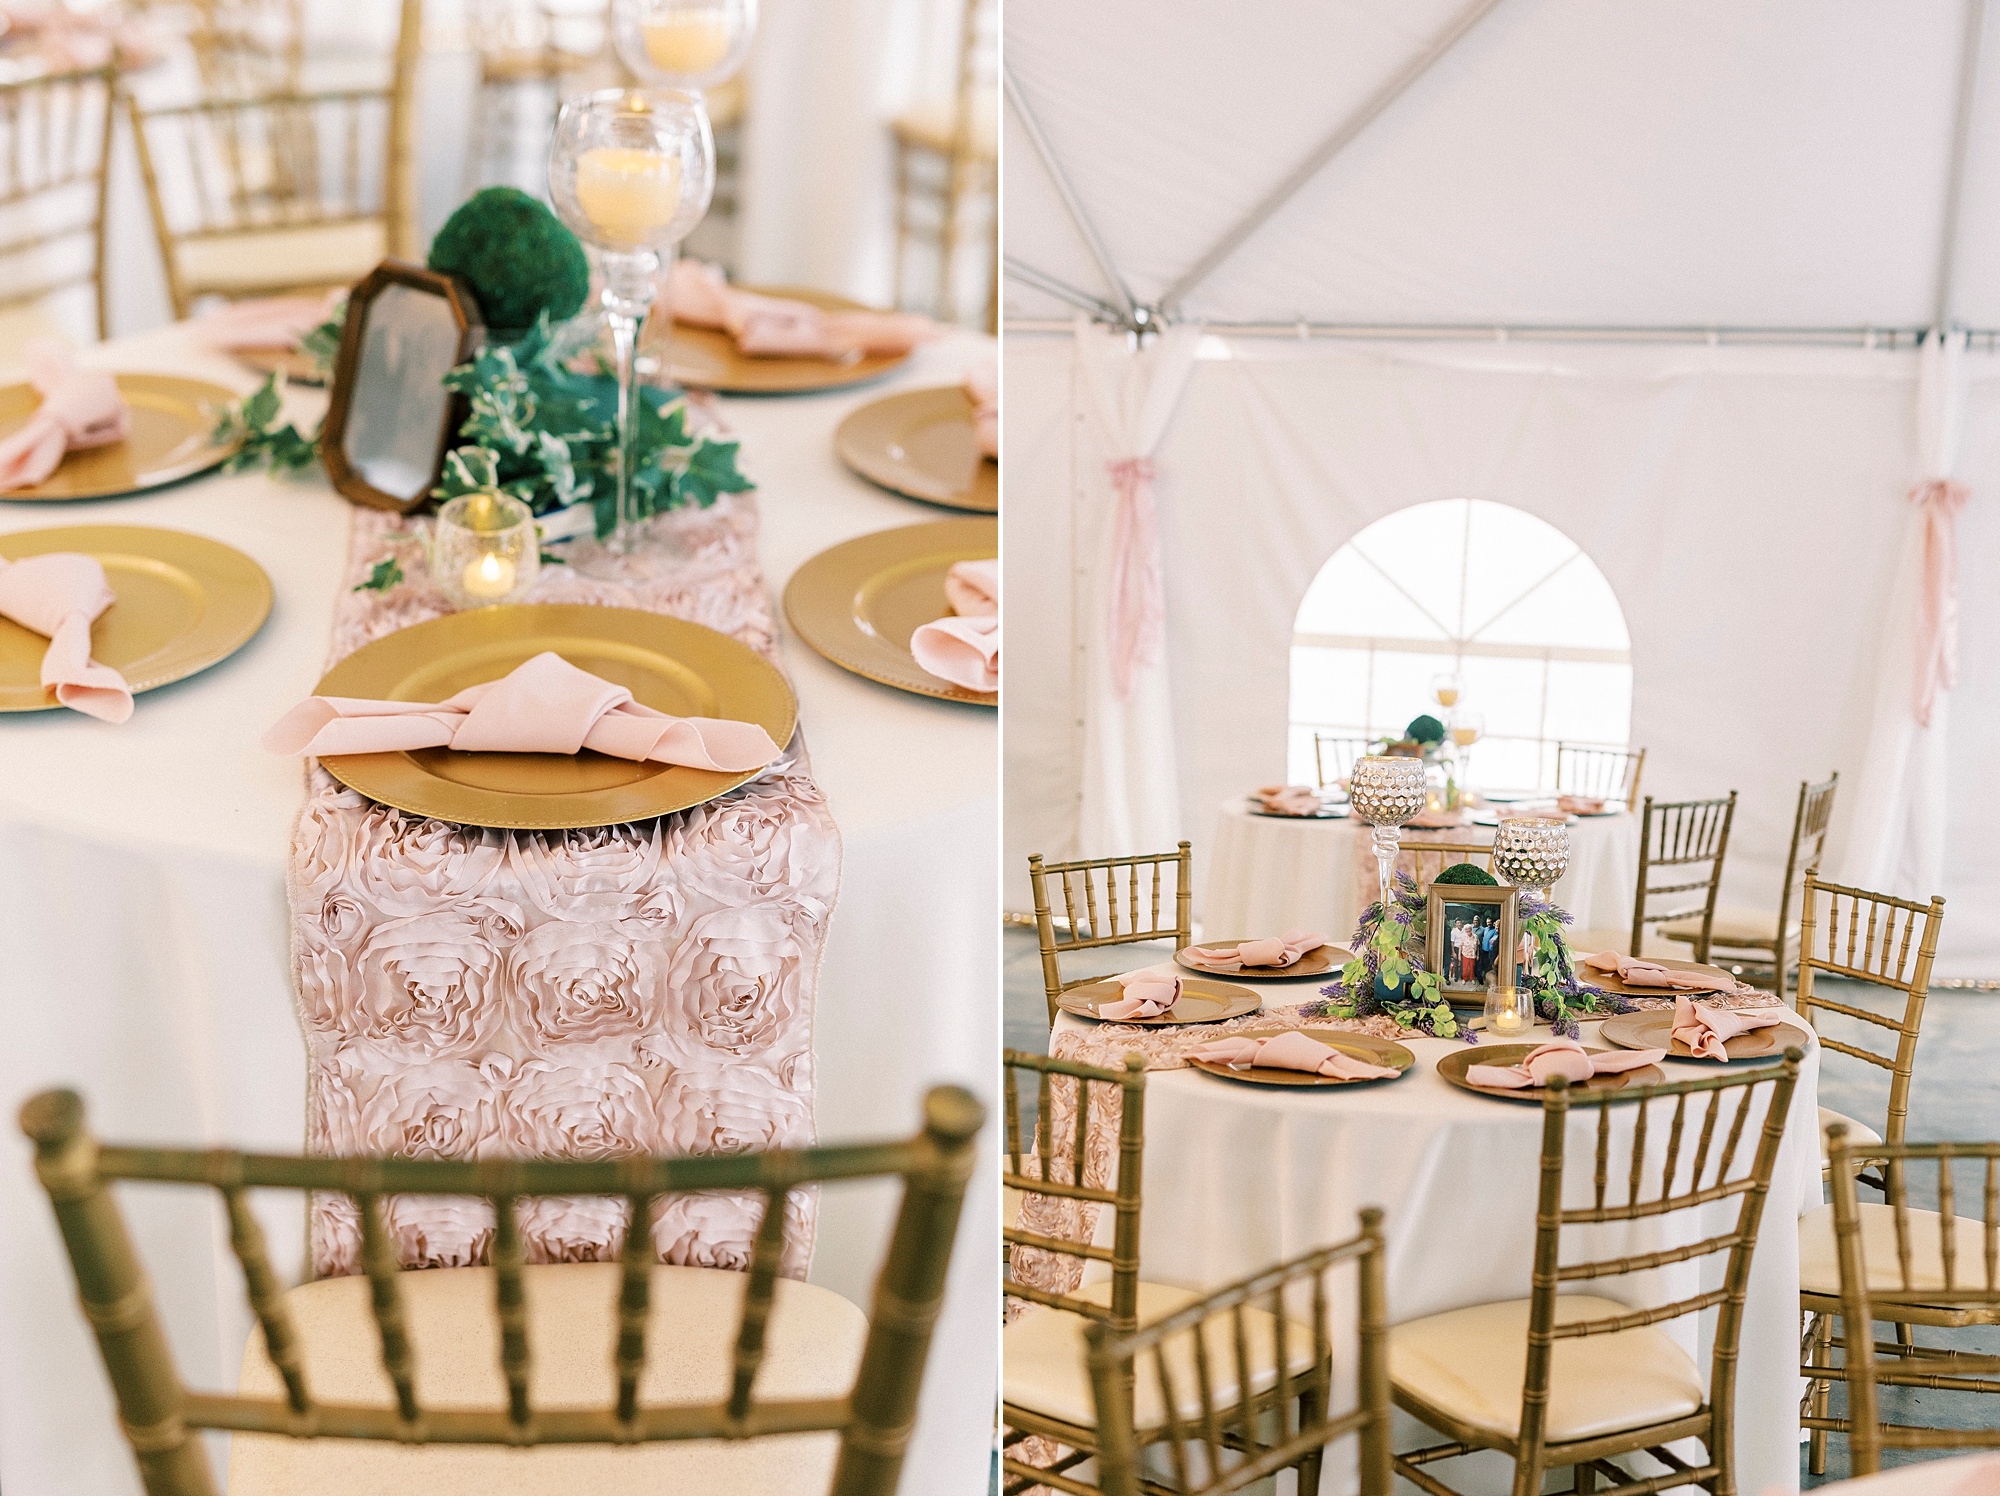 tented wedding reception with lace table runner and green centerpieces 